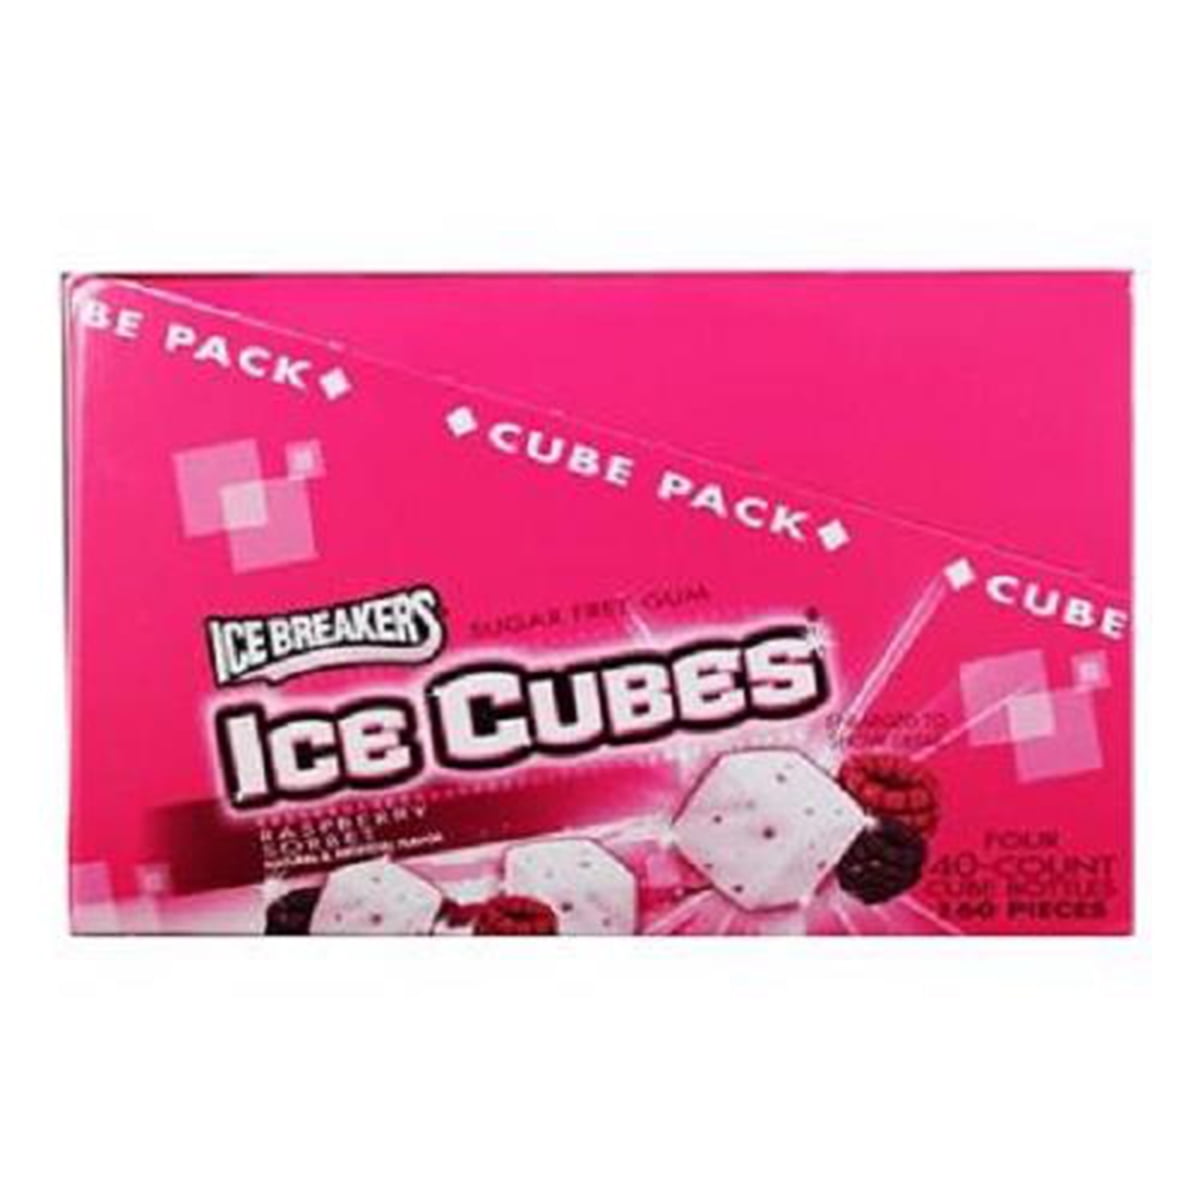 Product Of Ice Breakers Ice Cubes, Gum Raspberry Sorbet - Bottle, Count ...